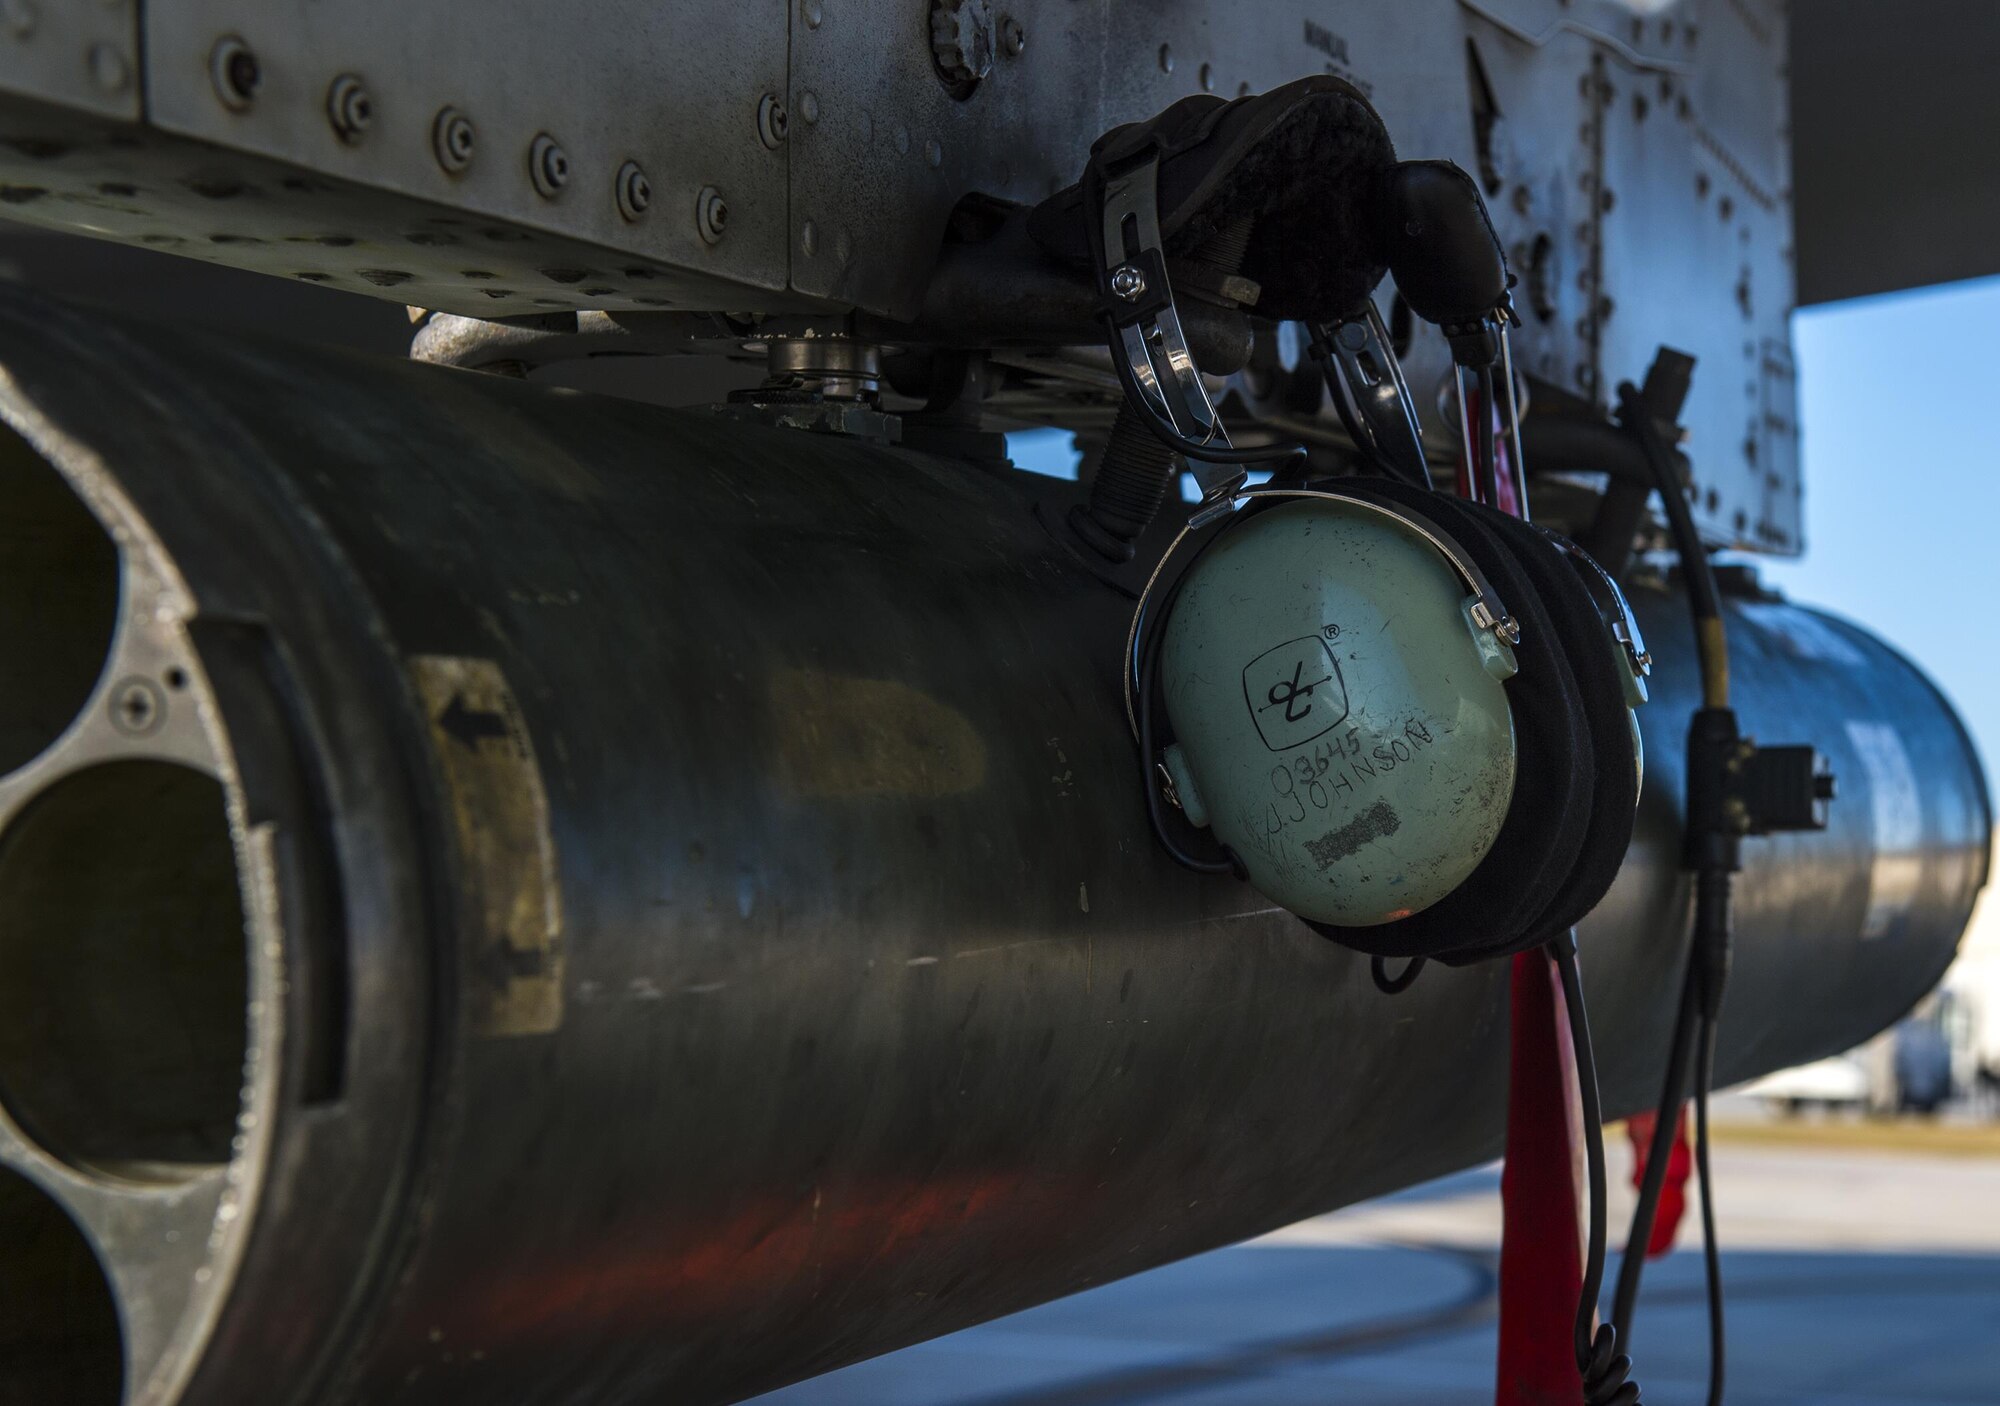 A headset hangs under the wing of an A-10C Thunderbolt II, Jan. 12, 2017, at Moody Air Force Base, Ga. The A-10C provides close air support when Airmen are downrange and during realistic training exercises. (U.S. Photo by Airman 1st Class Janiqua P. Robinson)